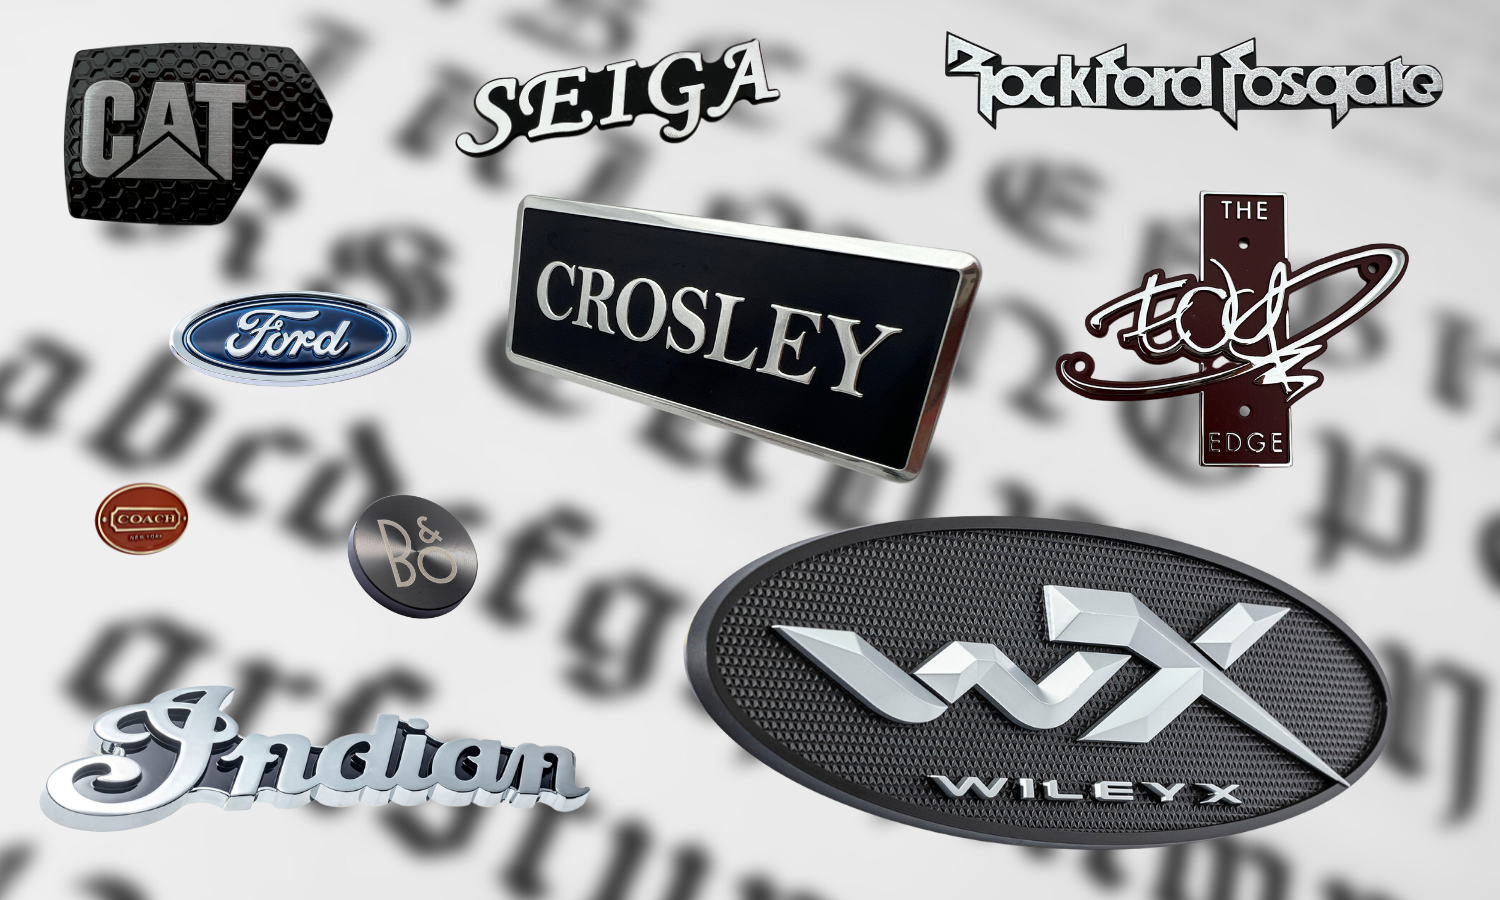 collage of name plates. blue oval ford, scripted Indian font, CAT in silver with black background; coach oval, B&O radial spin cut circle